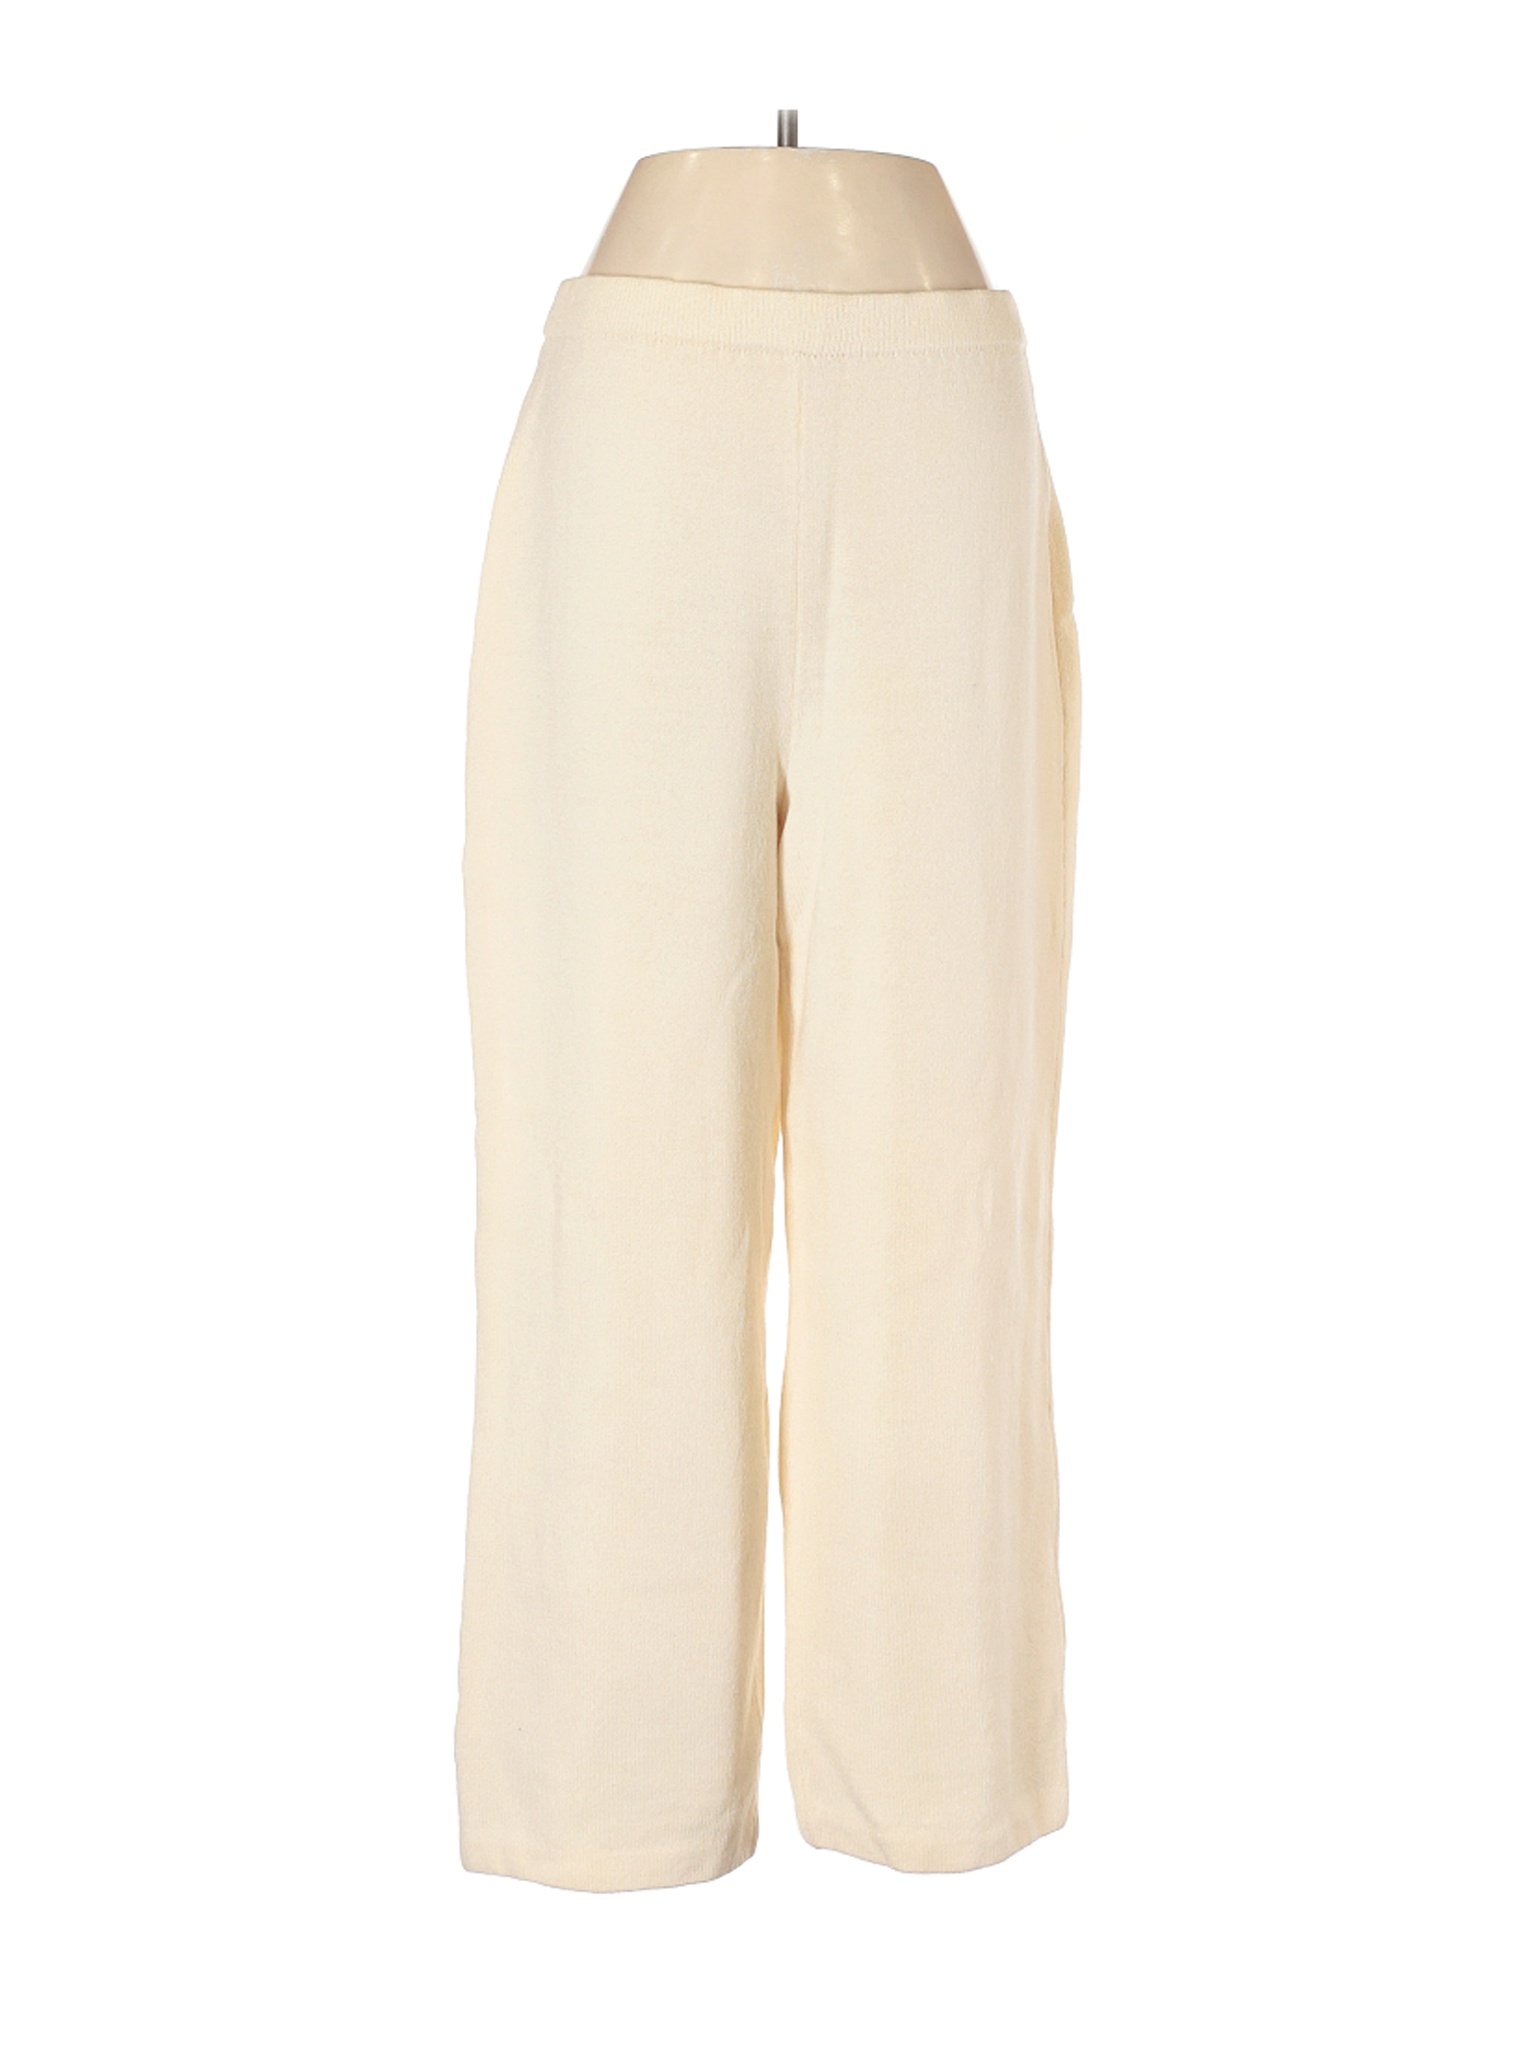 St. John Collection by Marie Gray Women Ivory Casual Pants 8 | eBay